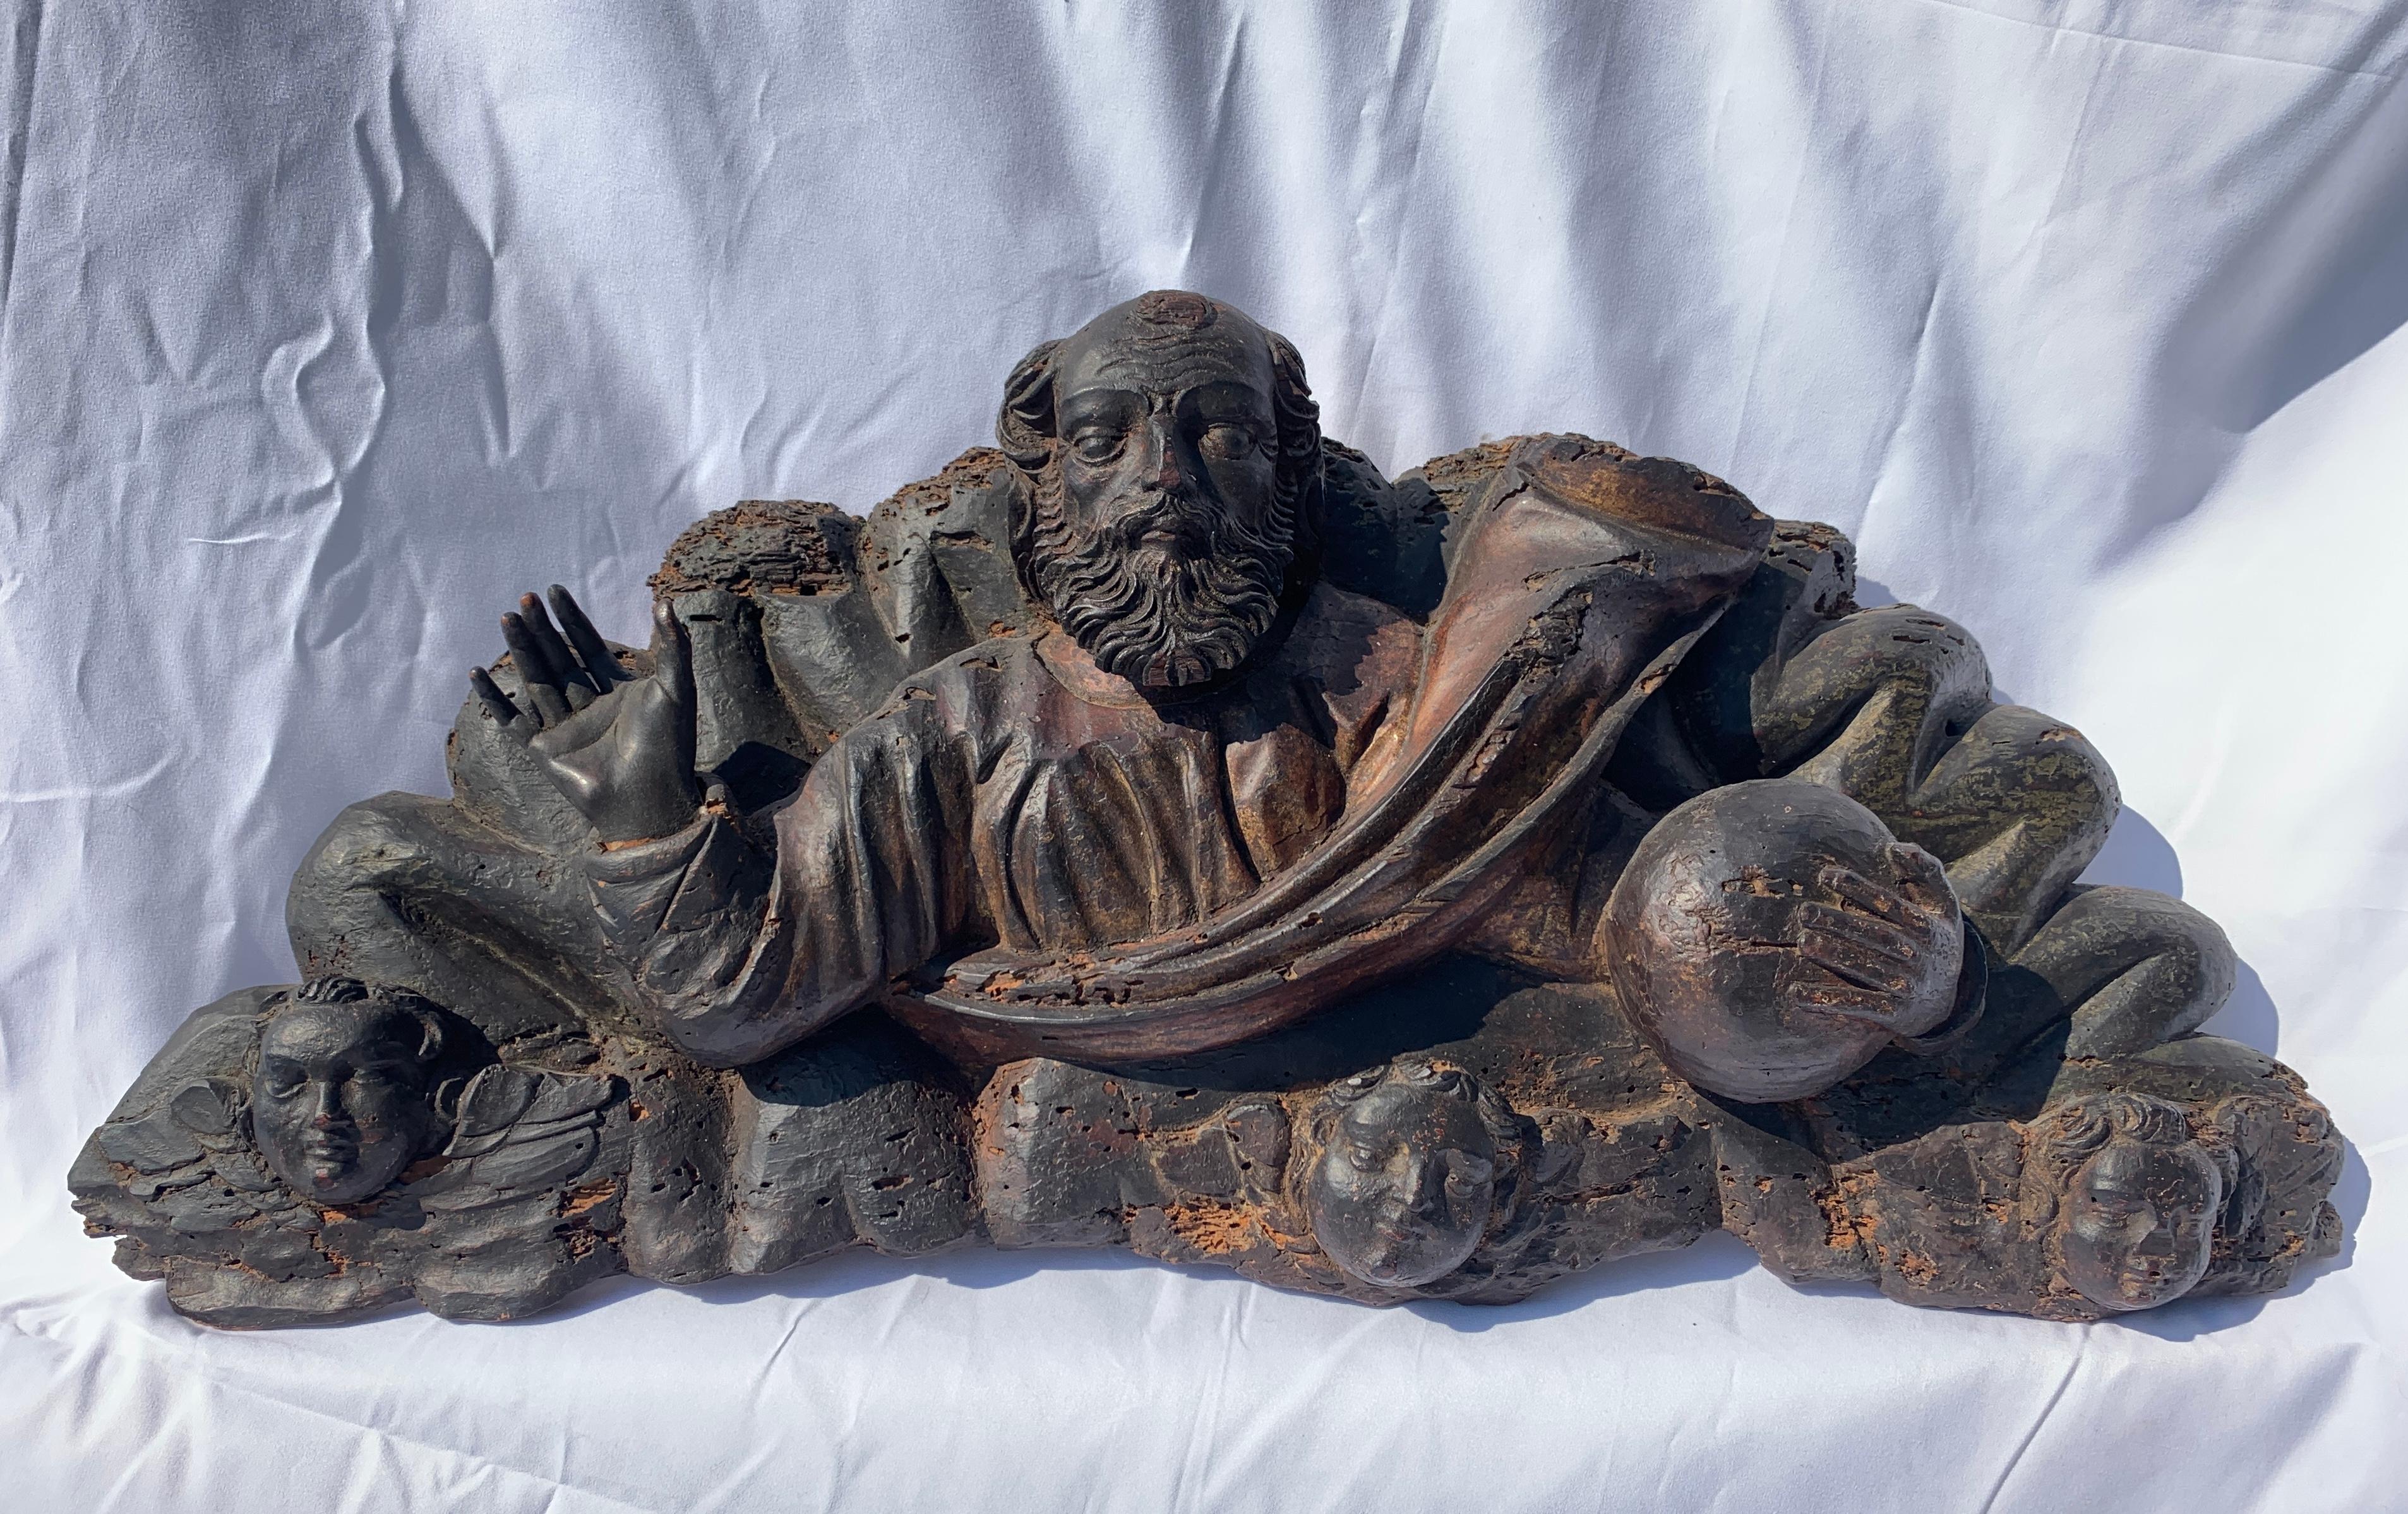 Baroque Italian Sculptor - 17th century carved wood sculpture - God father - Sculpture by Unknown